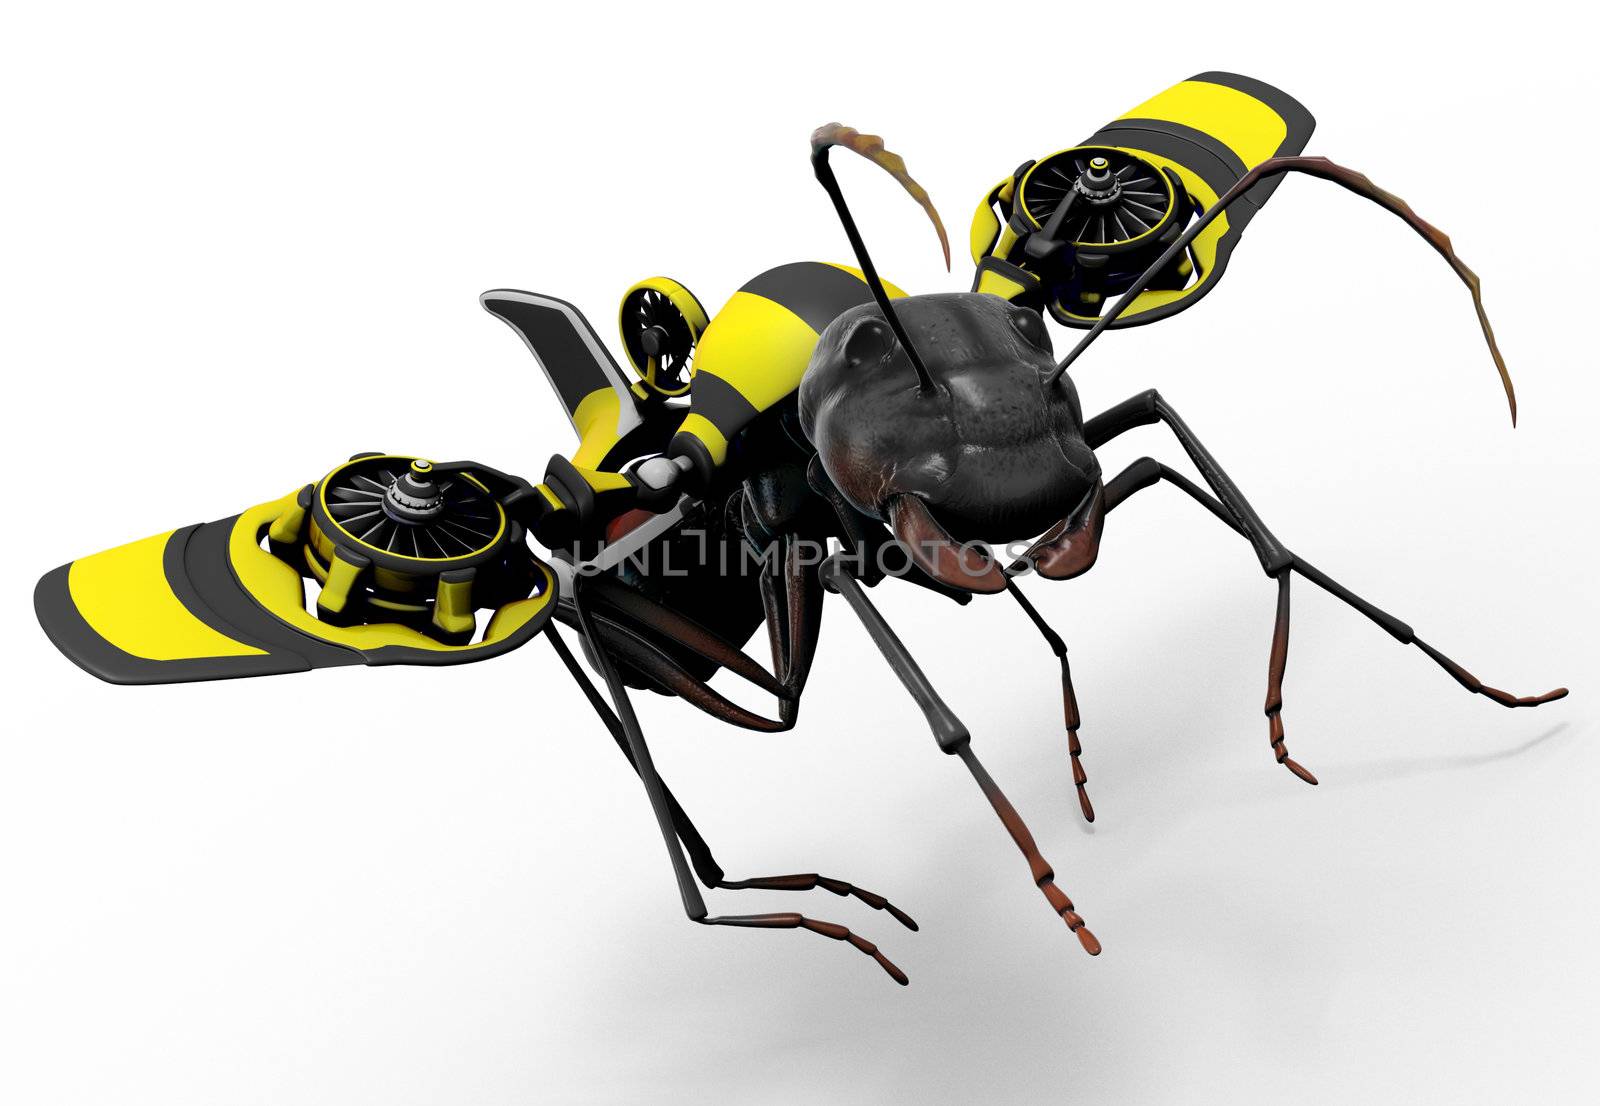 A worker ant with a wasp styled flying mechanism attached to his back. Good concept for exceeding personal limits. The color pattern of the jet pack suggest he is trying to be a wasp, a relative of the ant. 